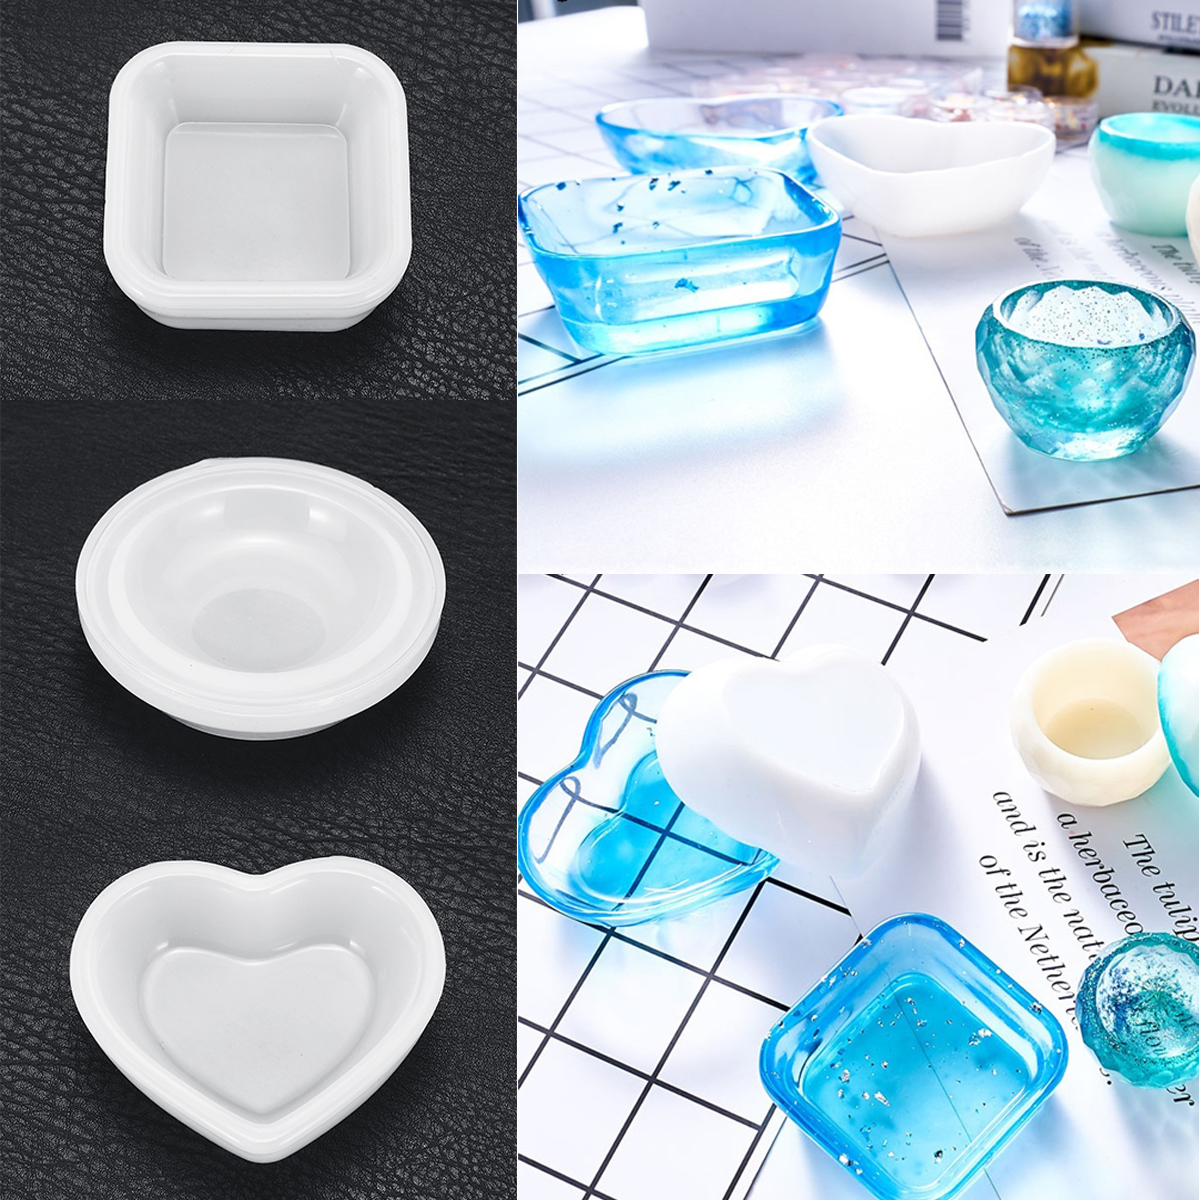 DIY-Resin-Casting-Molds-Heart-Square-Round-Shape-Mod-Clear-Silicone-Craft-Making-Mould-1526984-1